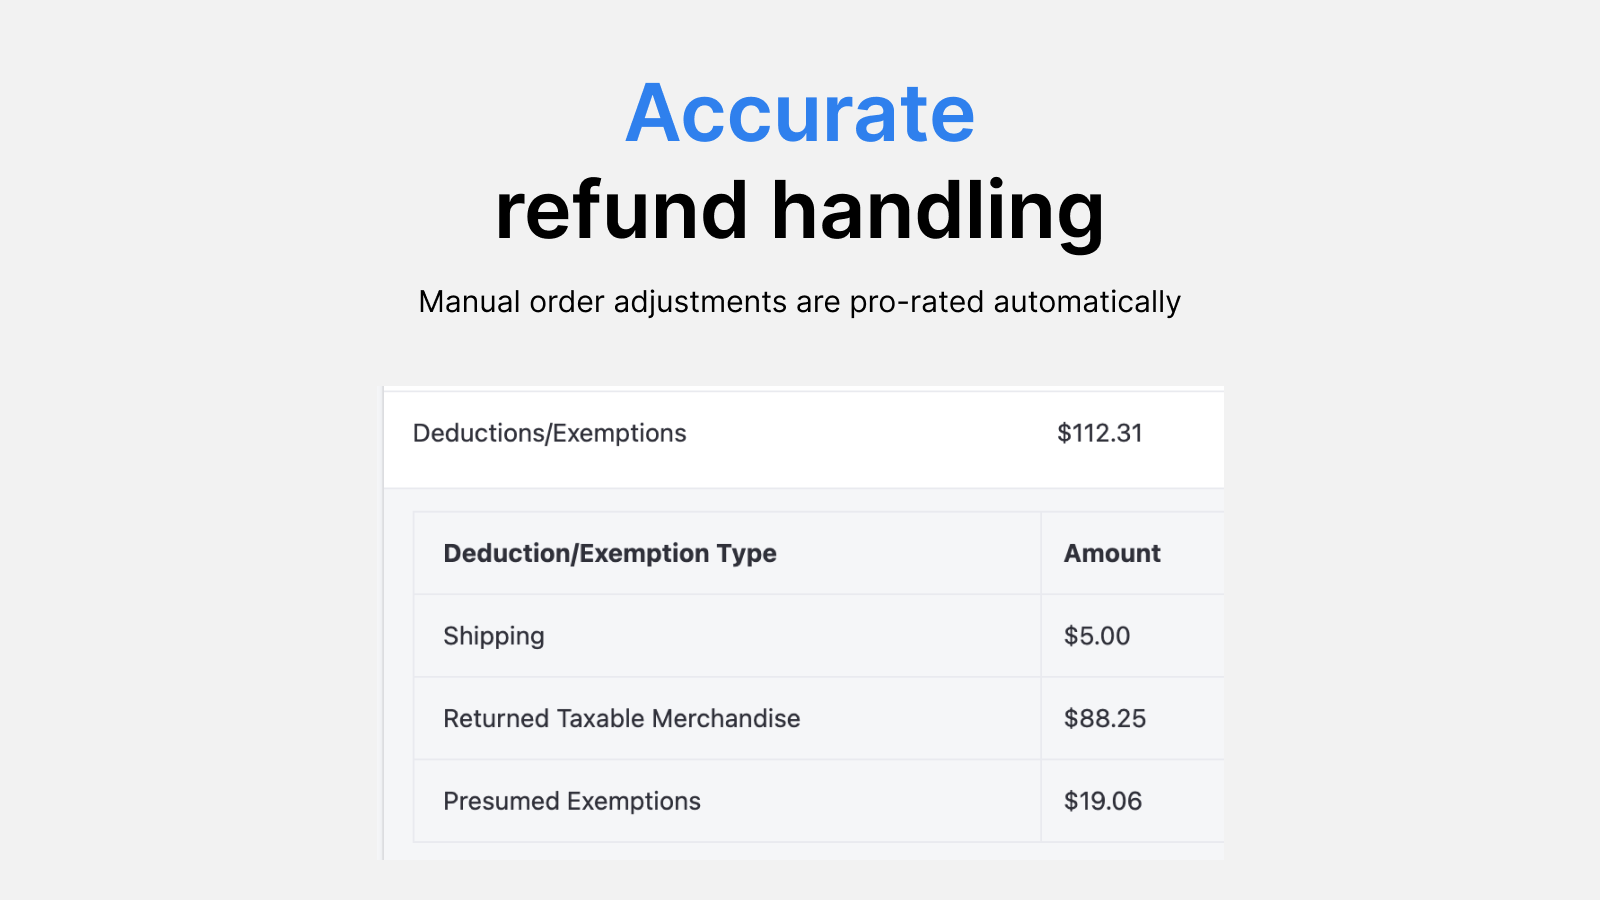 Accurate refund handling